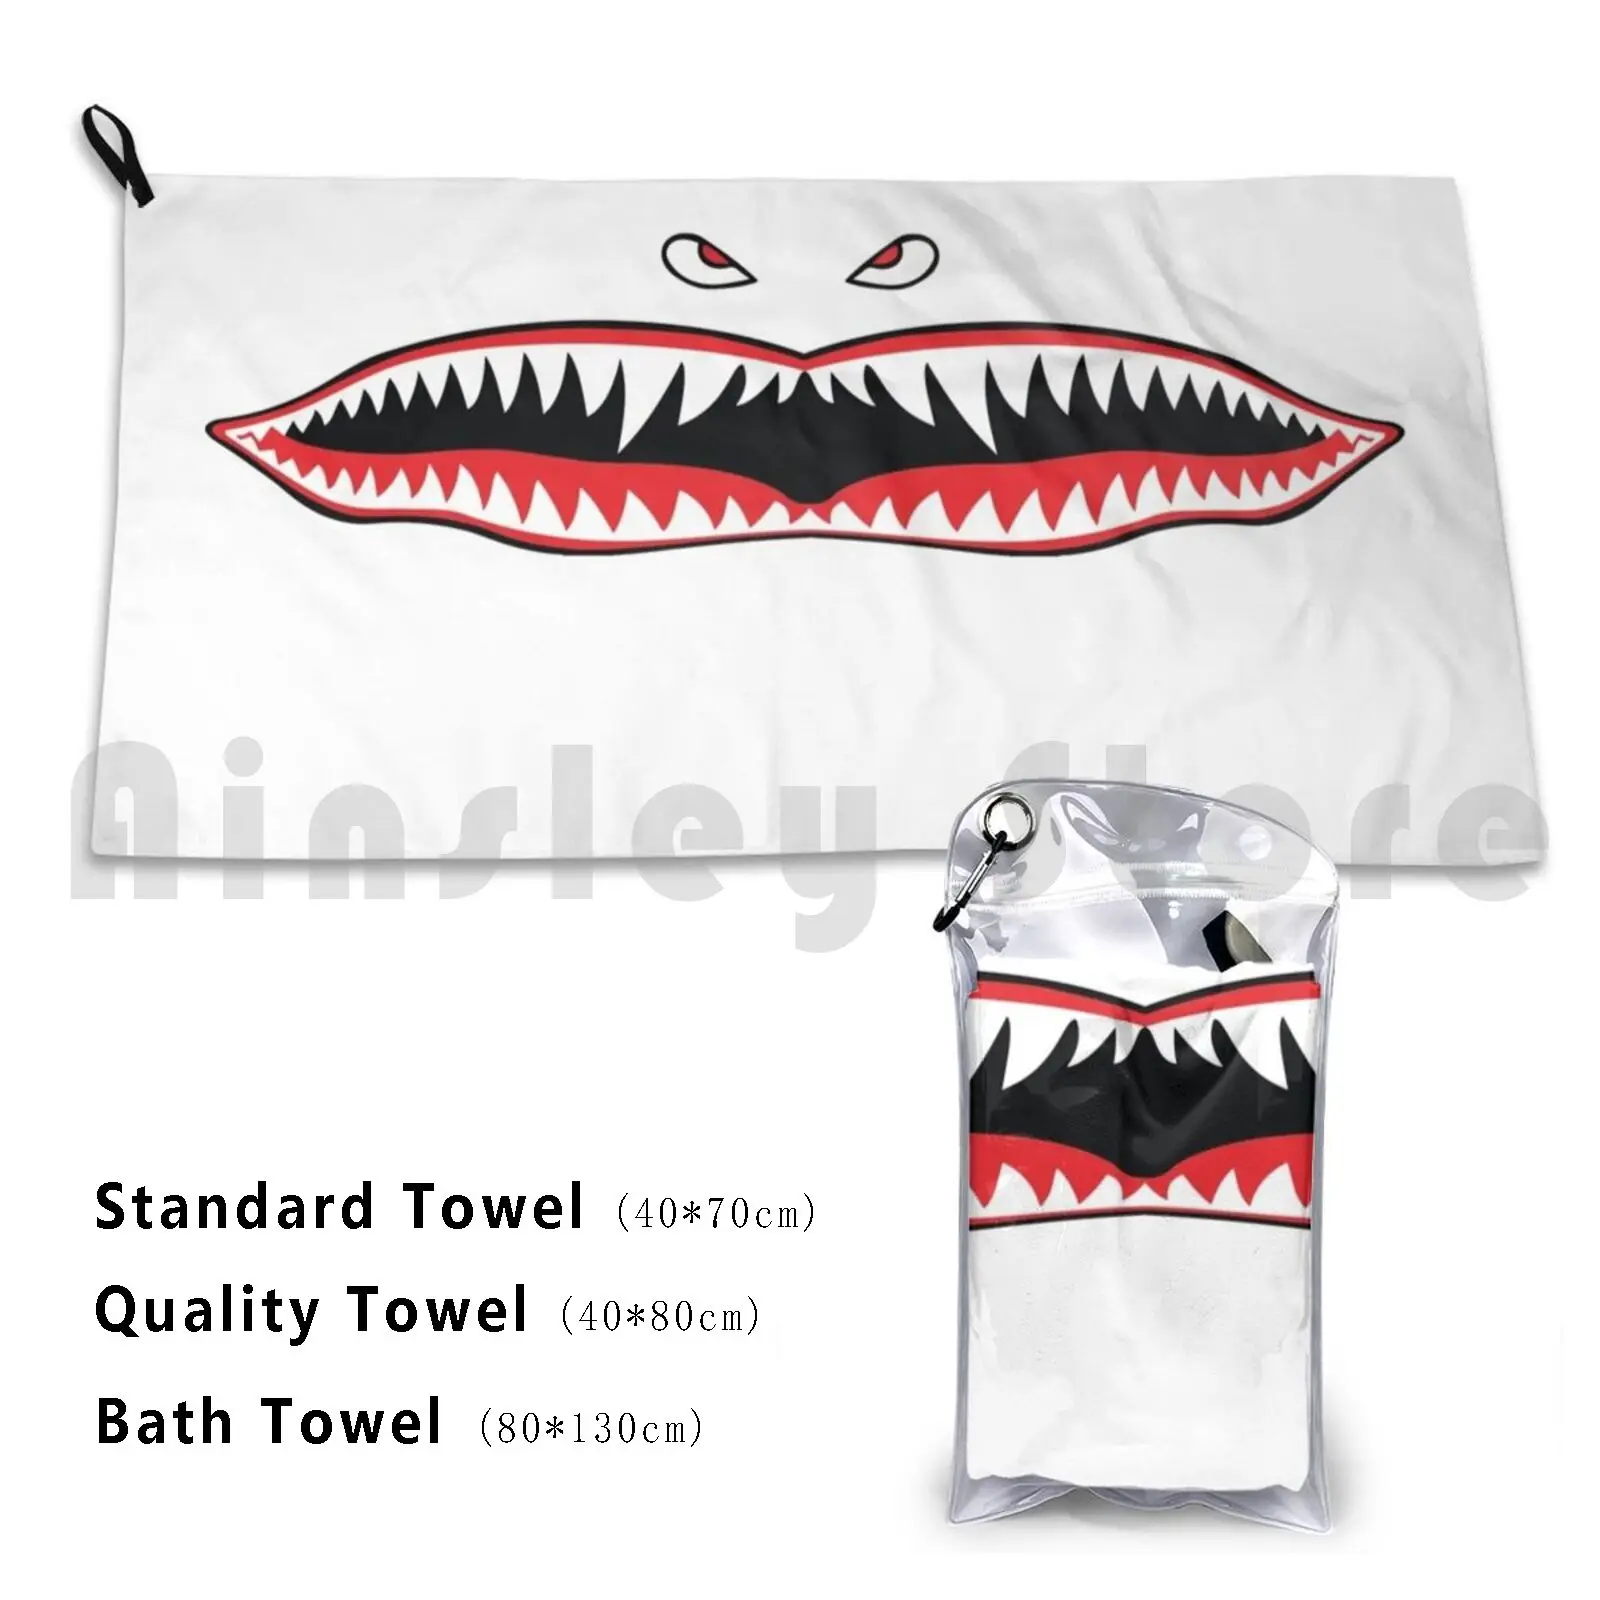 

Flying Tigers Shark Mouth-For Cats Lovers Bath Towel Beach Cushion Cat Cats Animal Nose Mouth Quarantine England